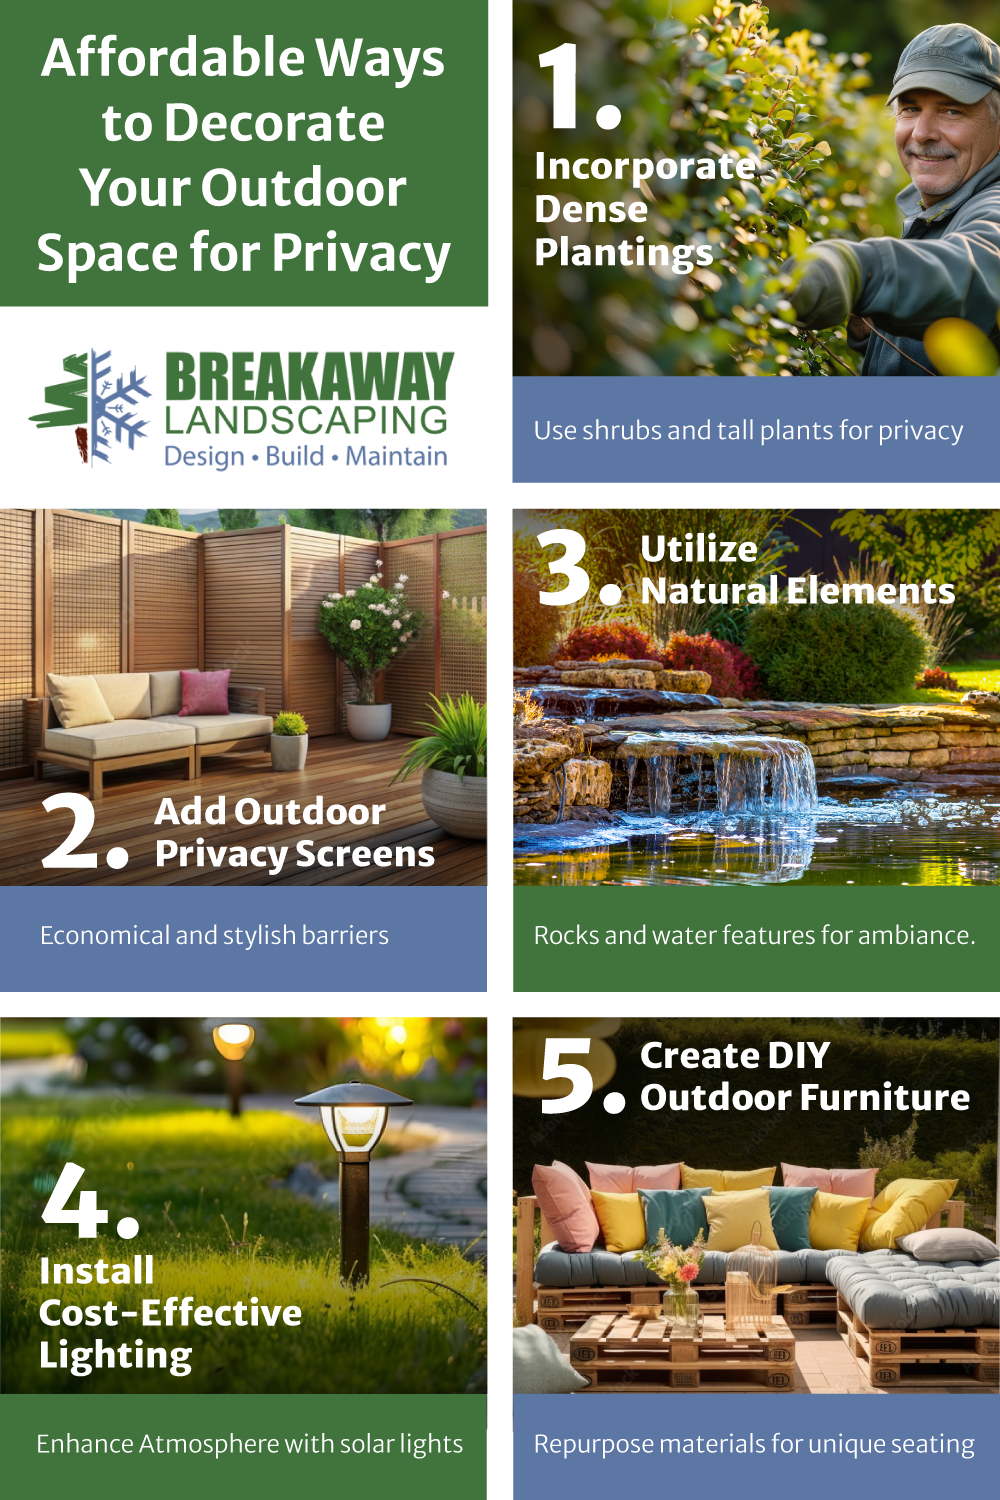 What Are Some Affordable Ways to Create a Secluded Outdoor Oasis Infographic